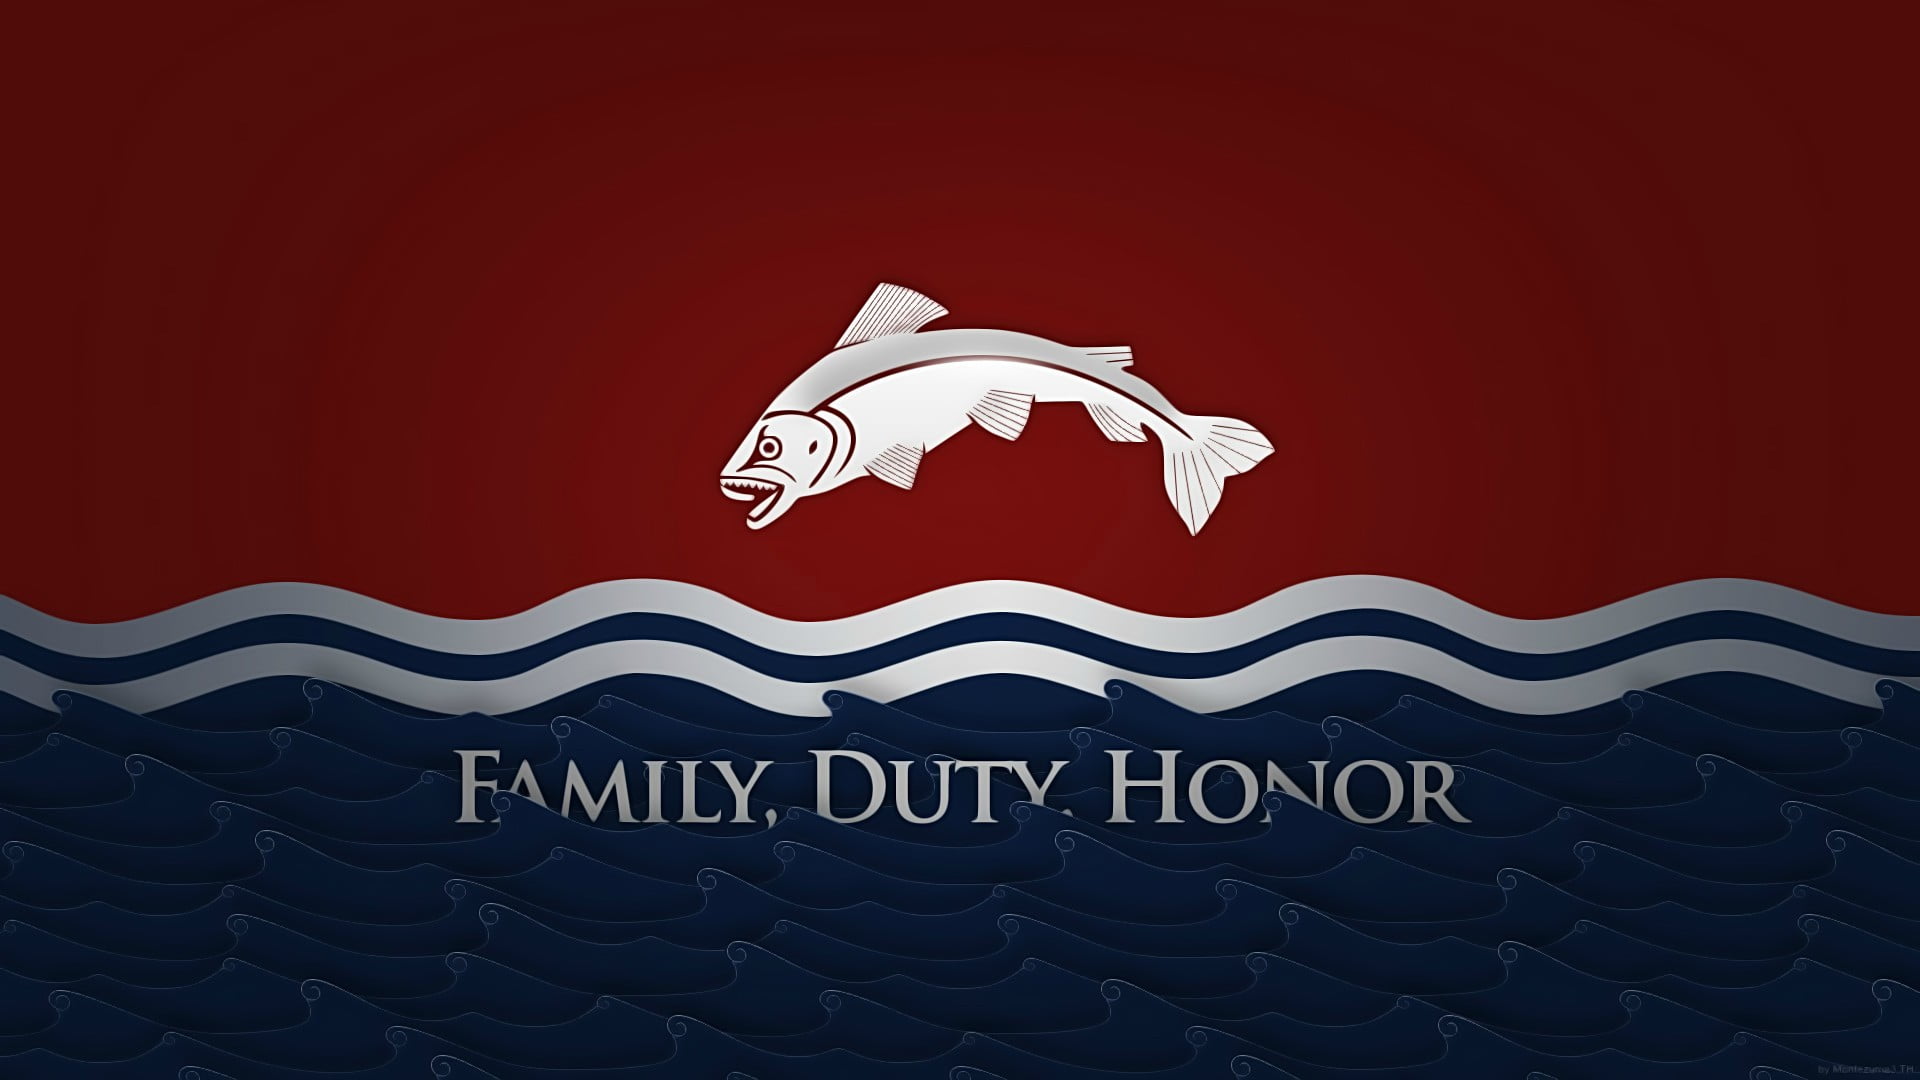 family duty honor logo, Game of Thrones, sigils, House Tully